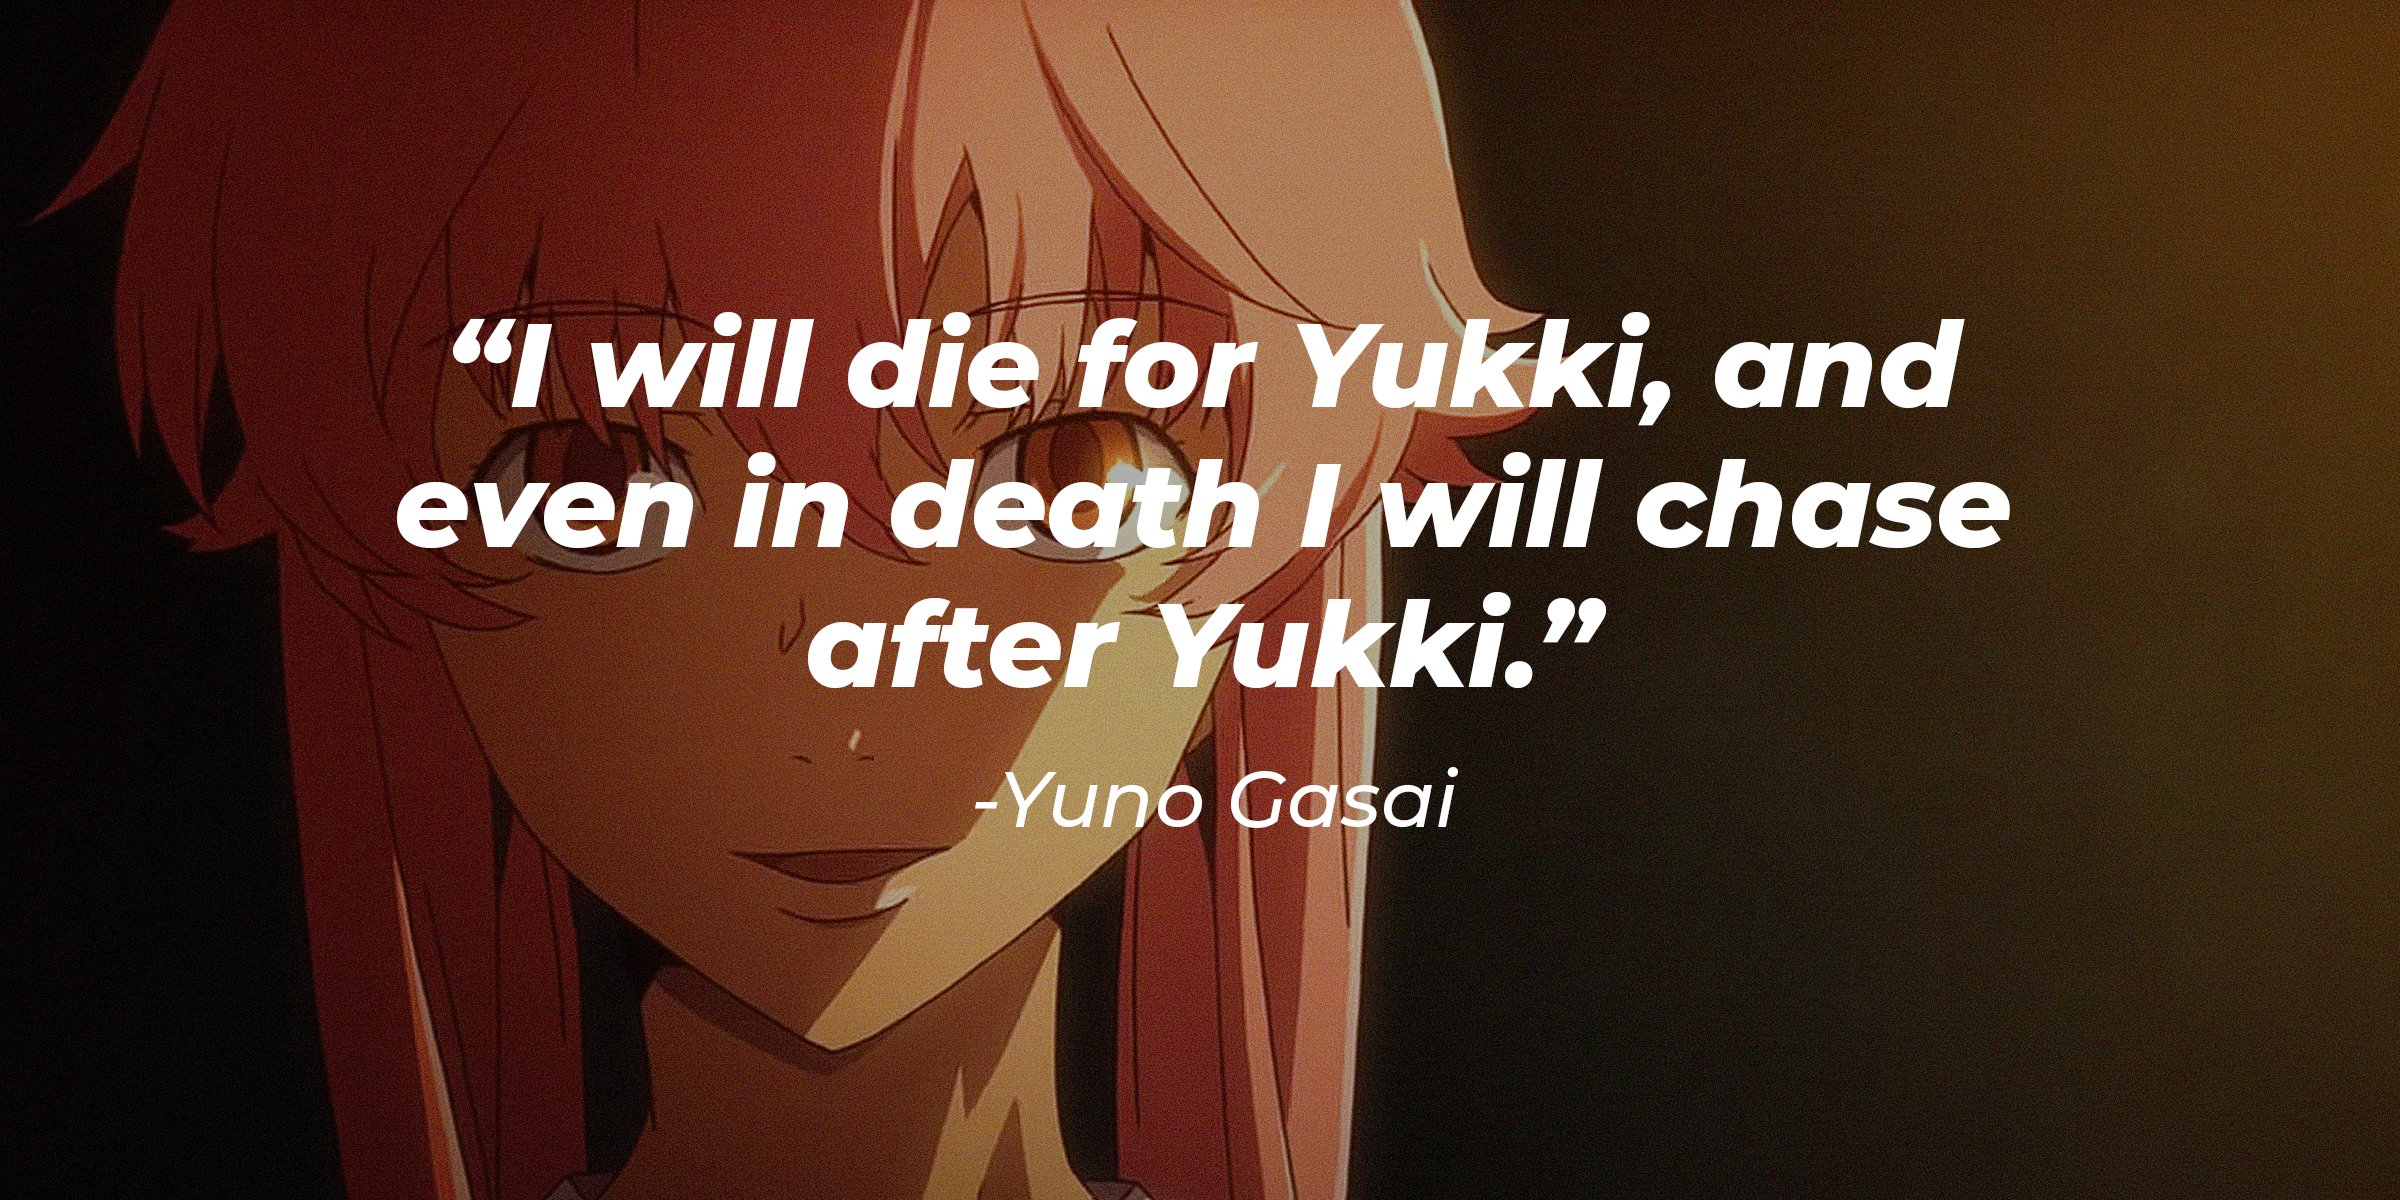 youtube.com/Crunchyroll Store Australia  |  A picture of Yuno Gasai with a quote by her that reads: "I will die for Yukki, and even in death I will chase after Yukki."